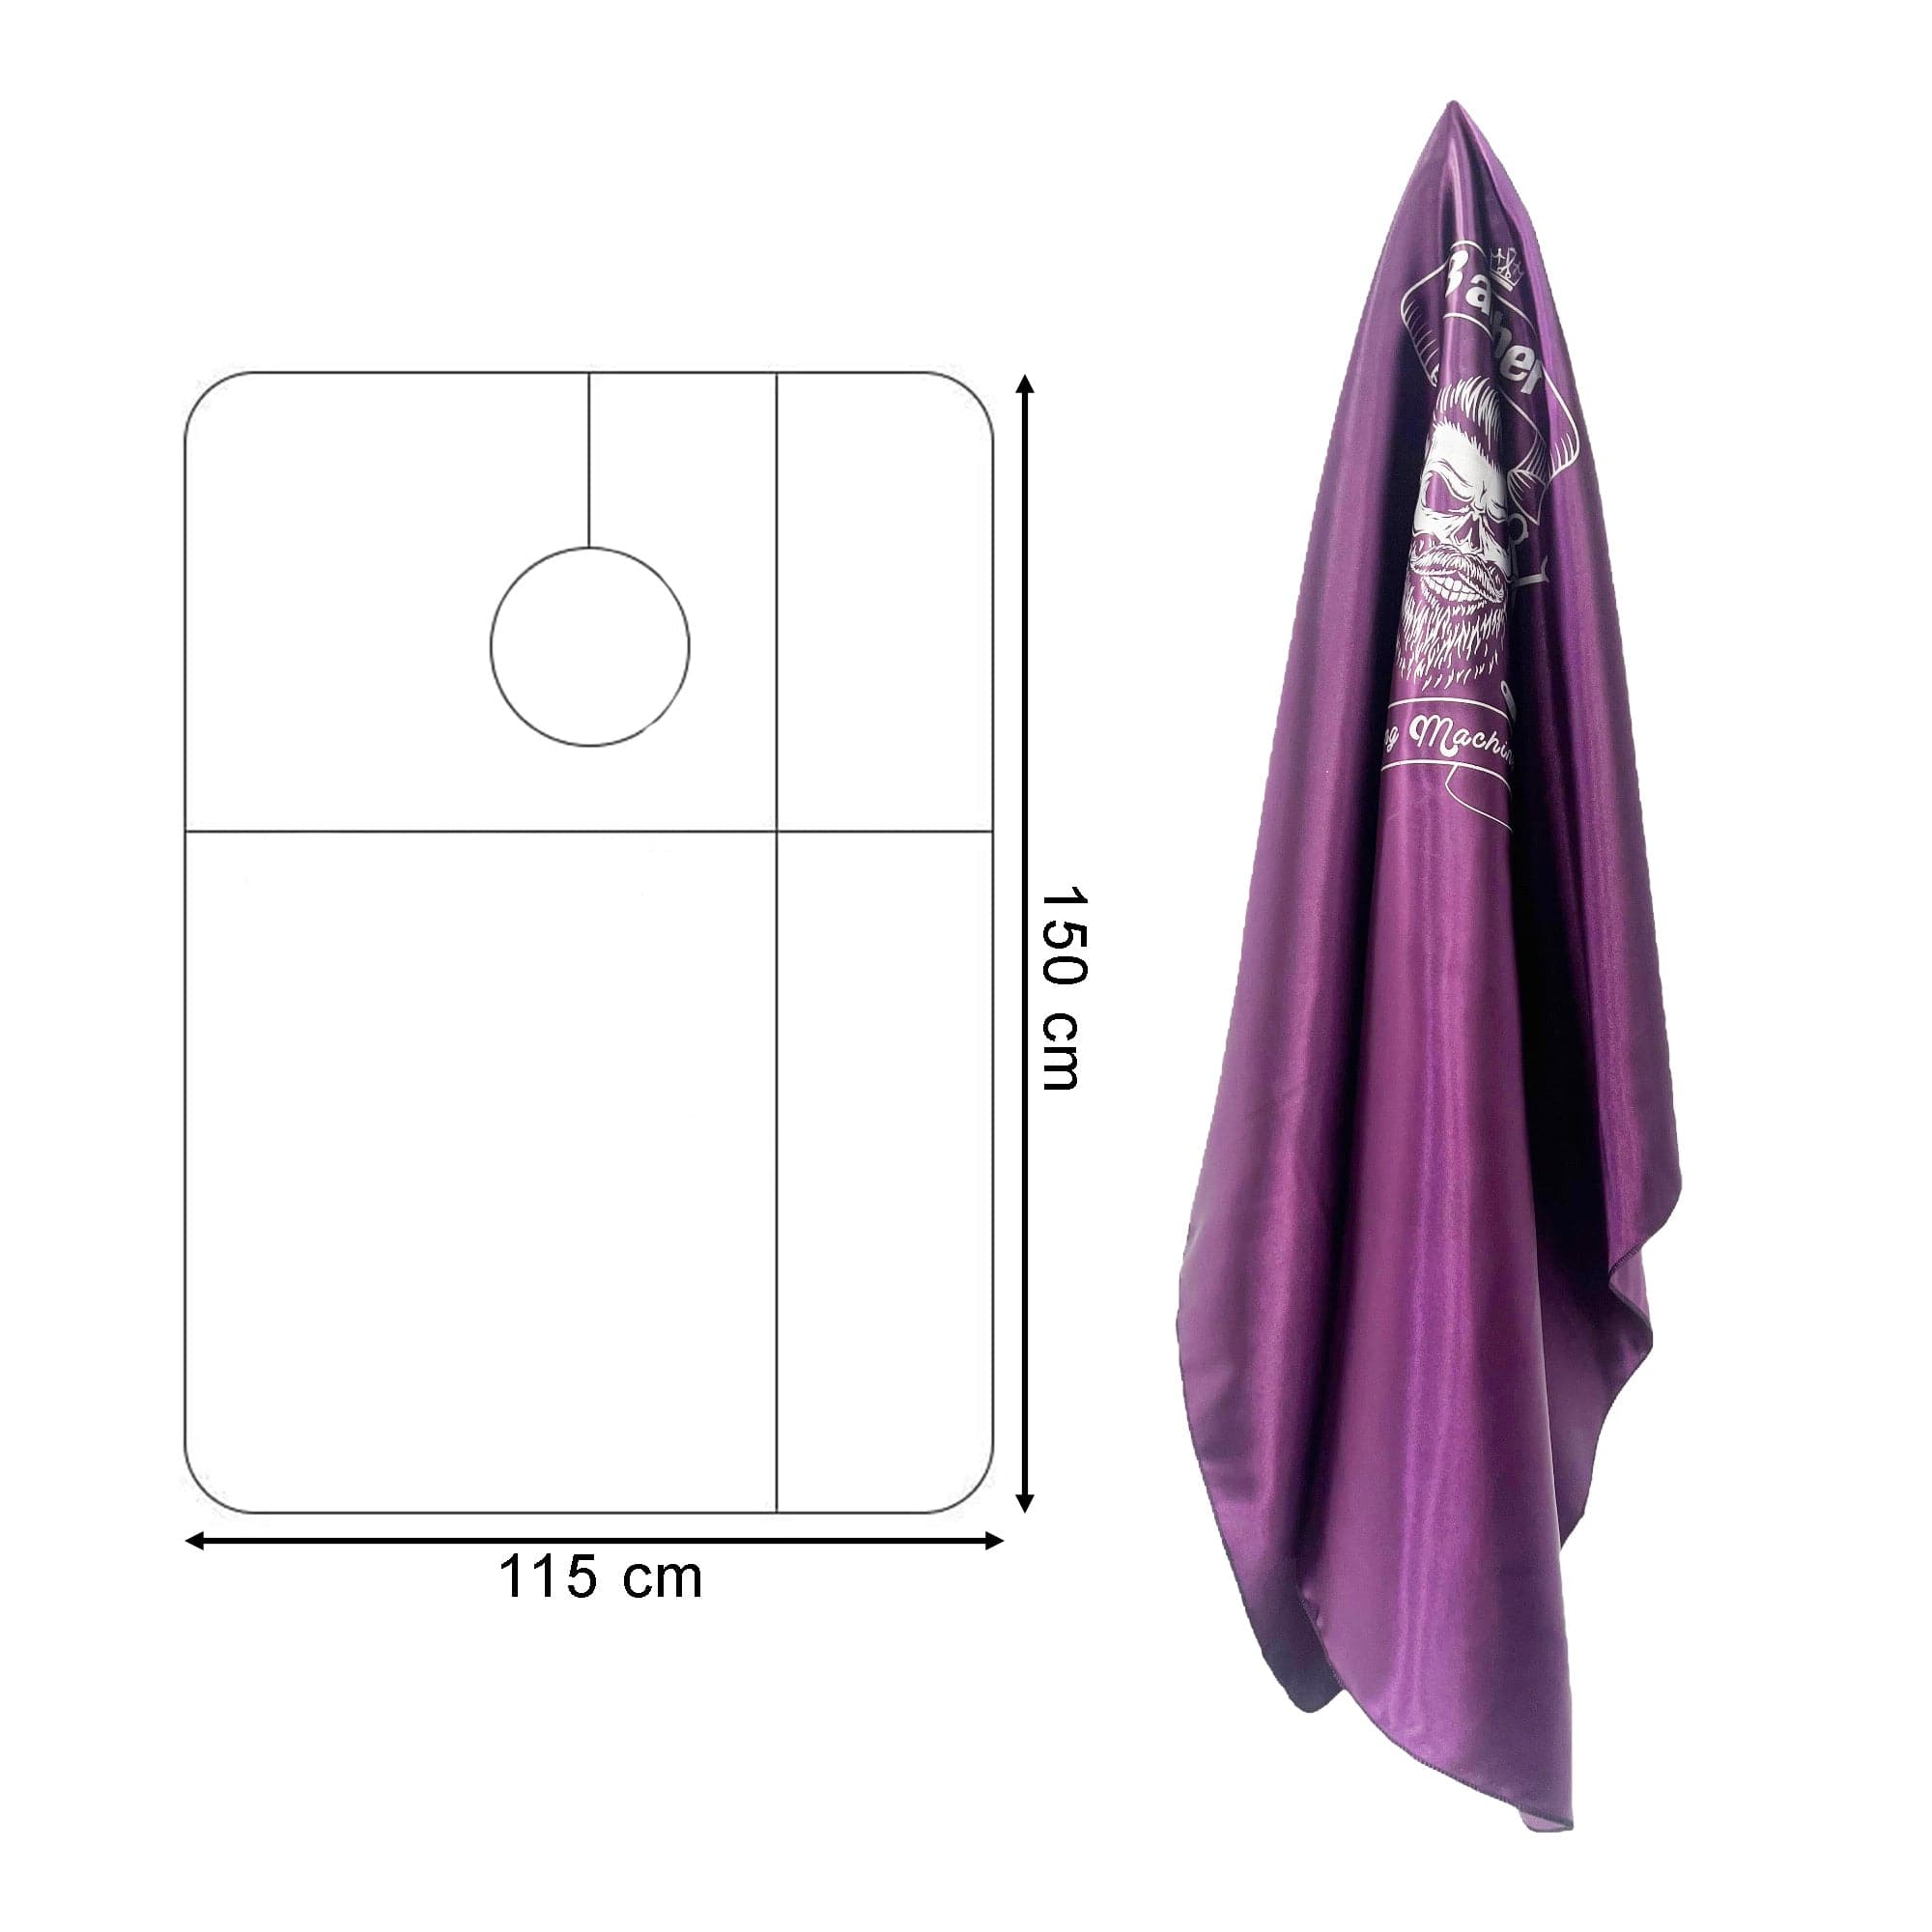 Gabri - Barber Hairdressing Hair Cutting Capes & Gowns Tools Pattern (Damson)